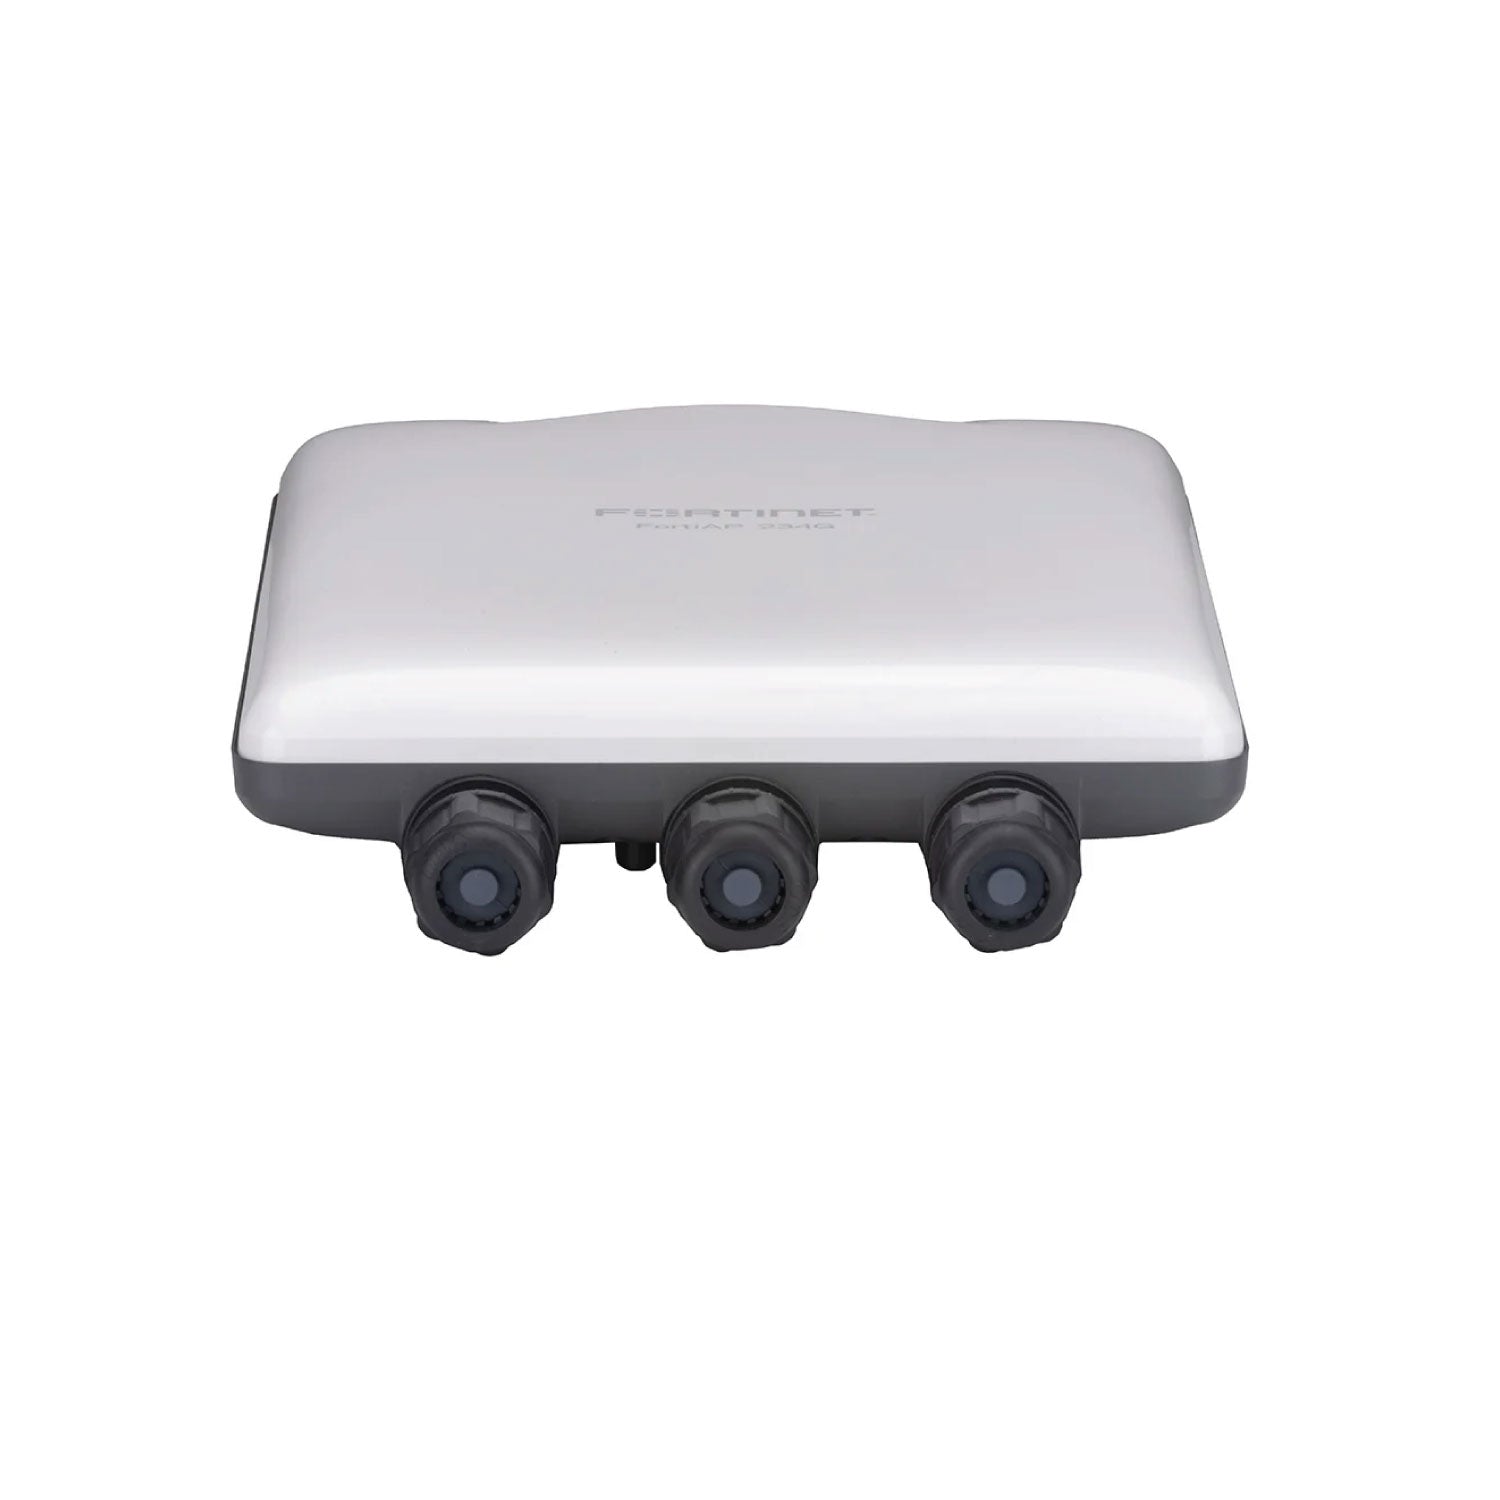 Acces Point Fortinet FortiAP-234G, Tri radio, RJ45, USB-A, PoE, Kit Montaje, Outdoor, 3Y (FAP-234G-N)